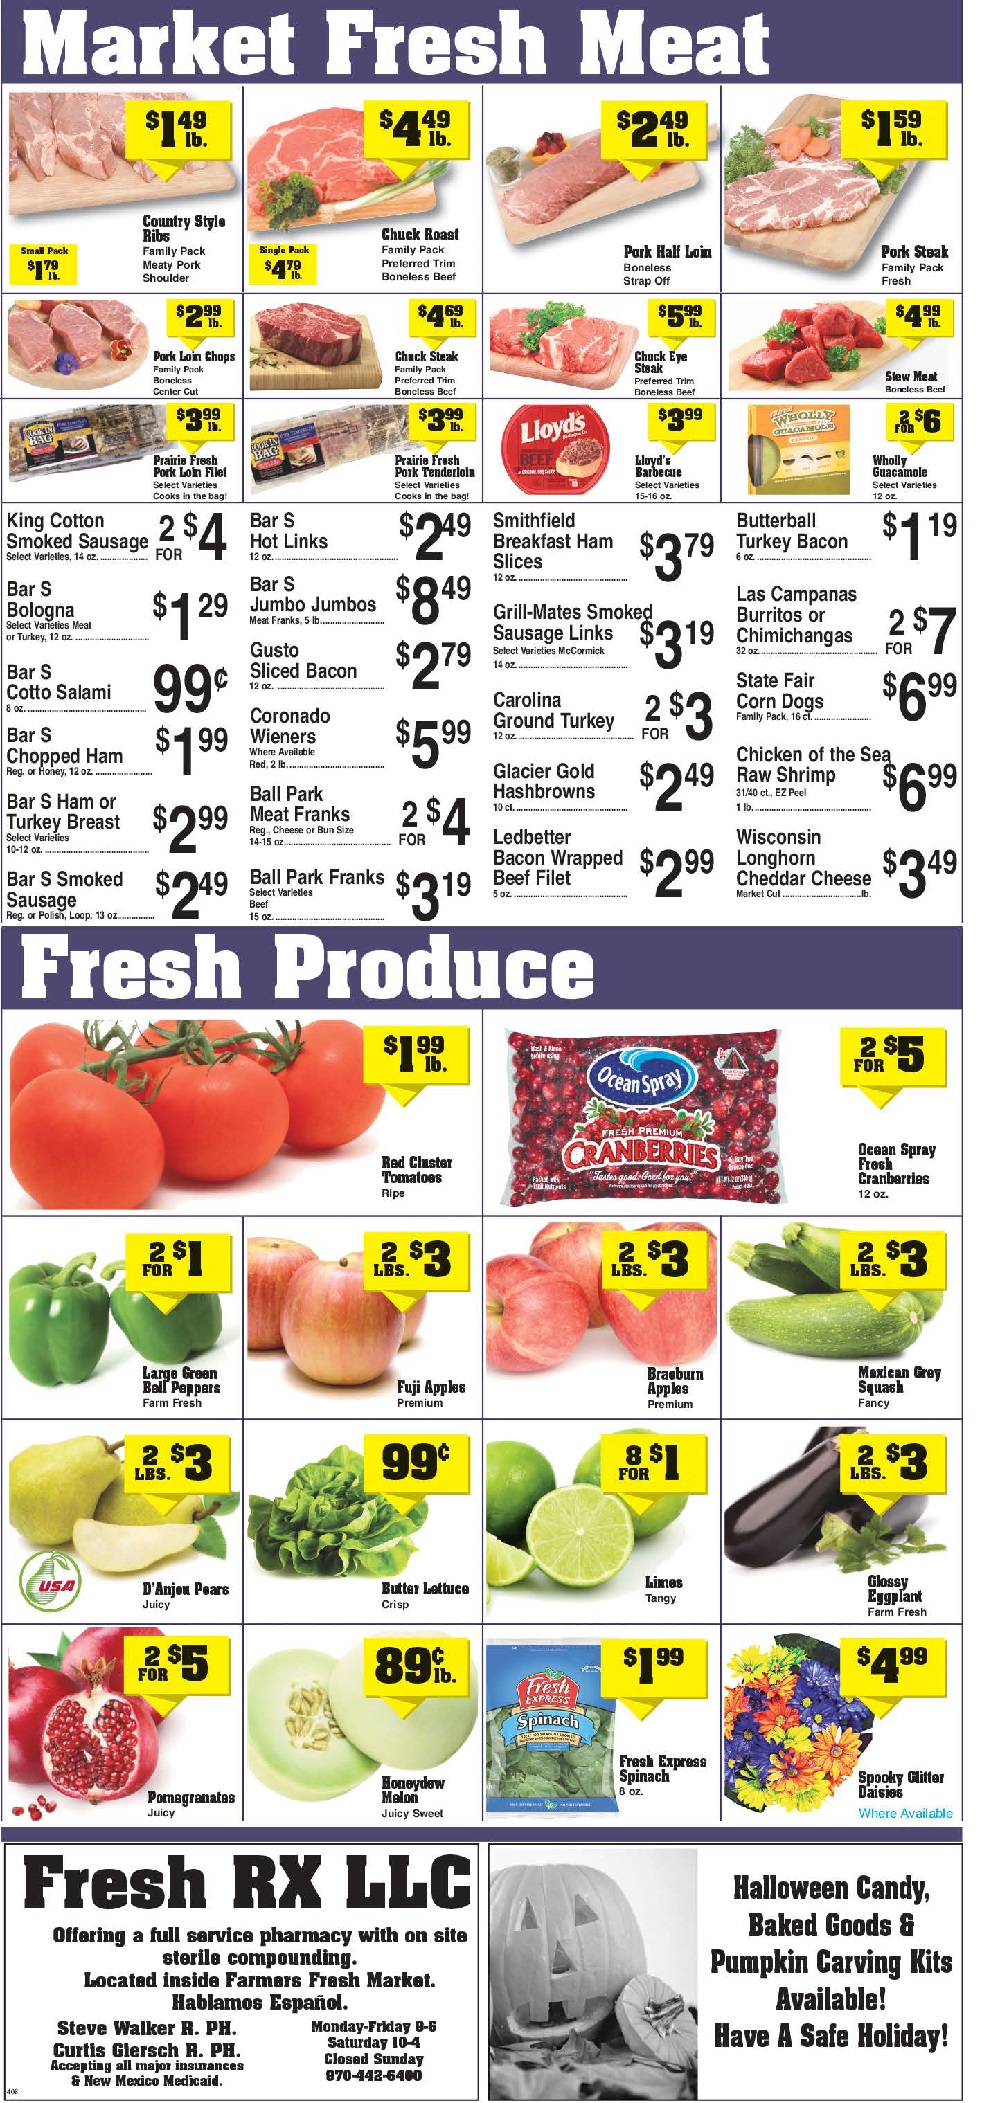 weekly-sales-for-oct-26th-nov-1st-pg4